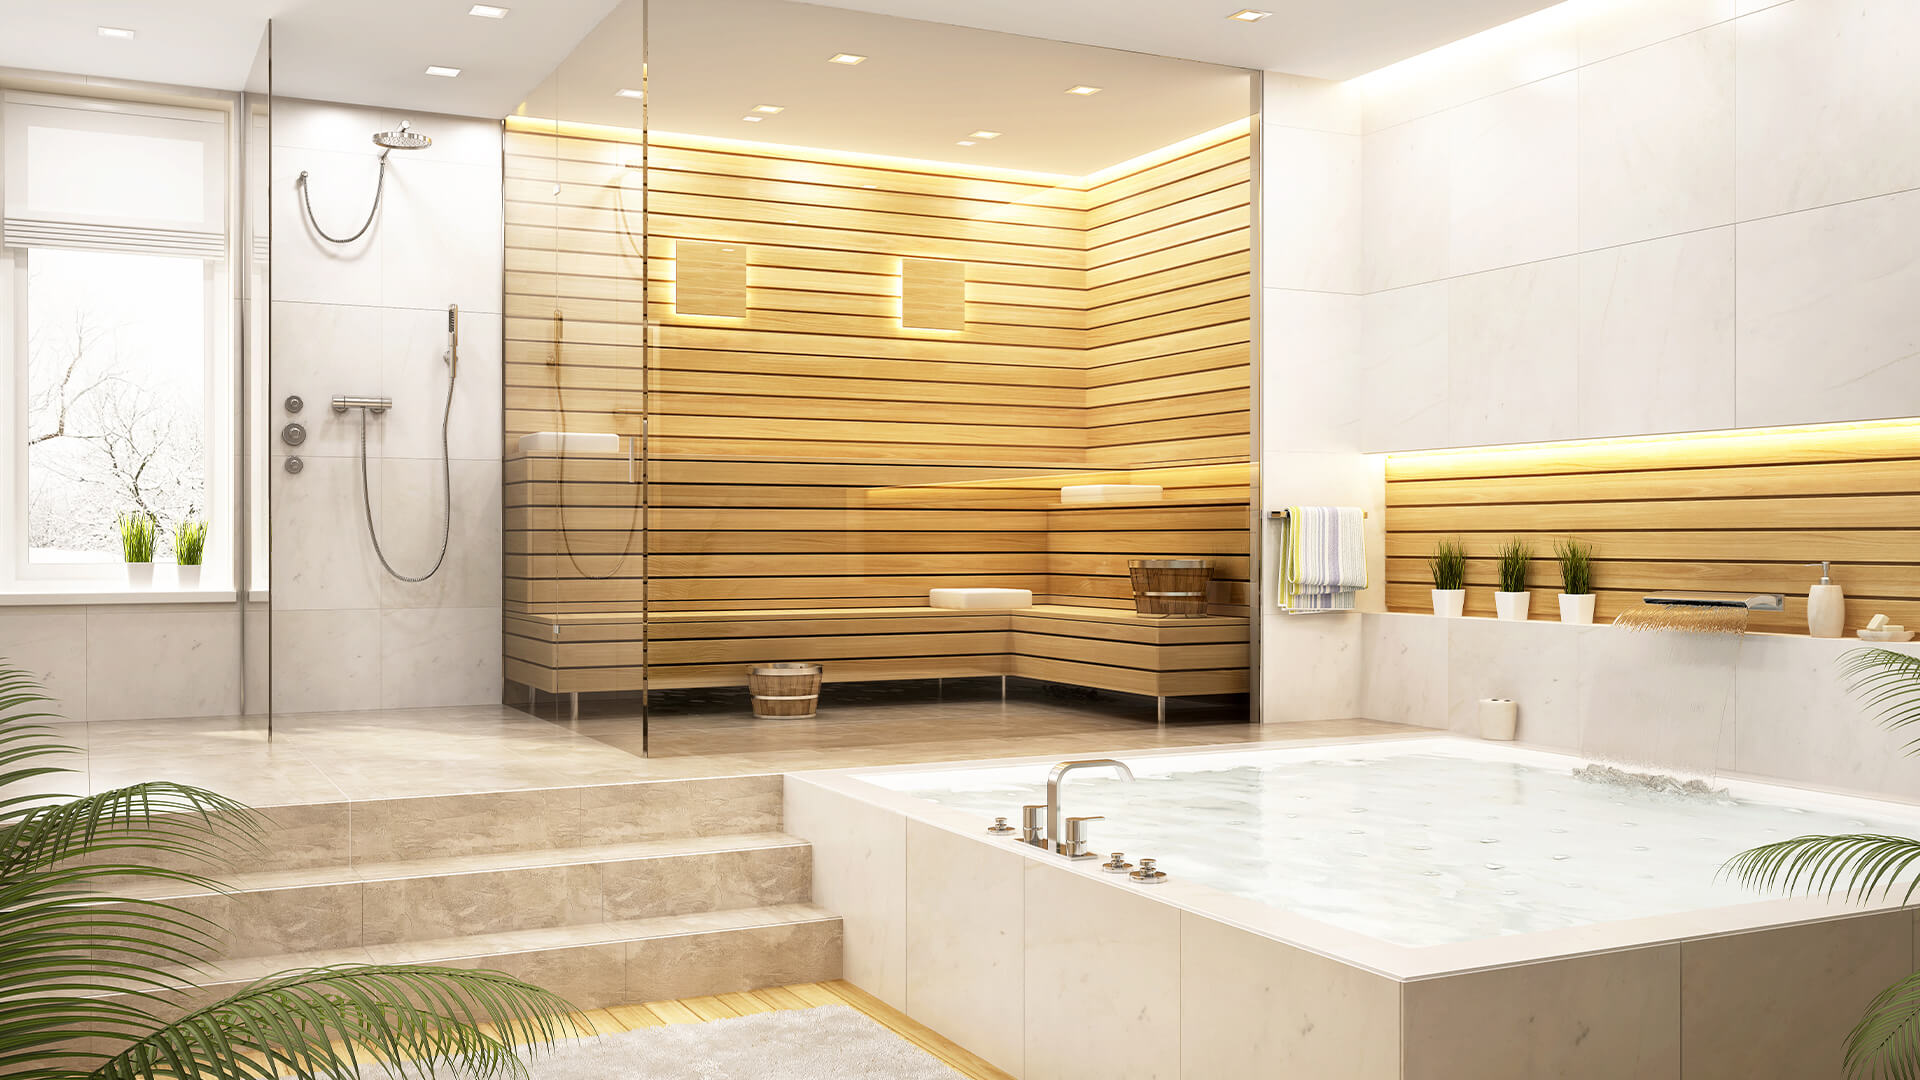 6 Upgrades for a Luxury Spa-Inspired Bathroom - LUXlife Magazine